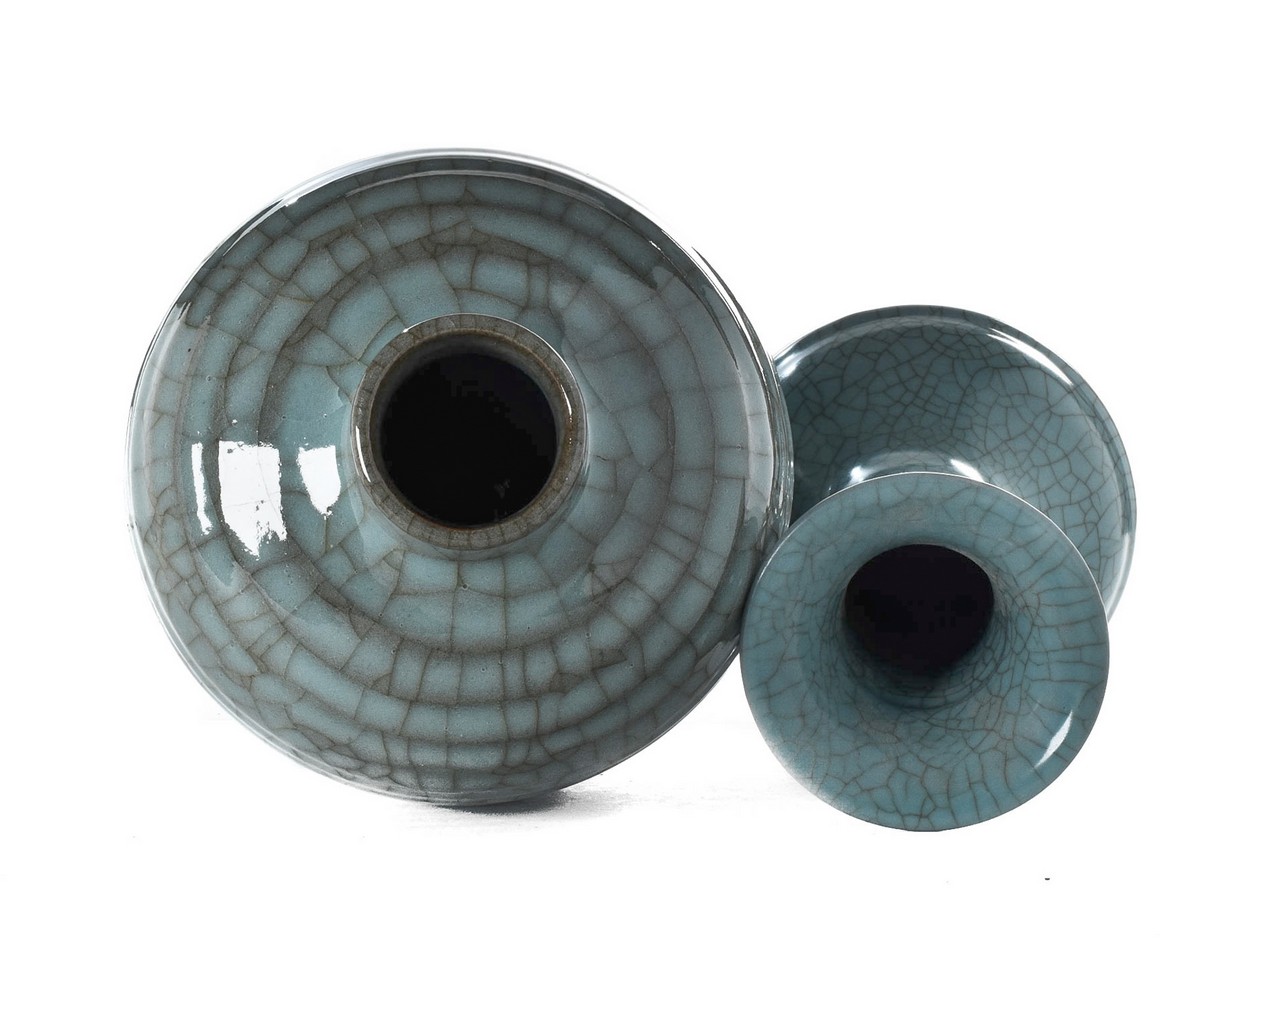 PAIR OF CHINESE CRACKLED GLAZE PORCELAIN VESSELS - Image 7 of 8